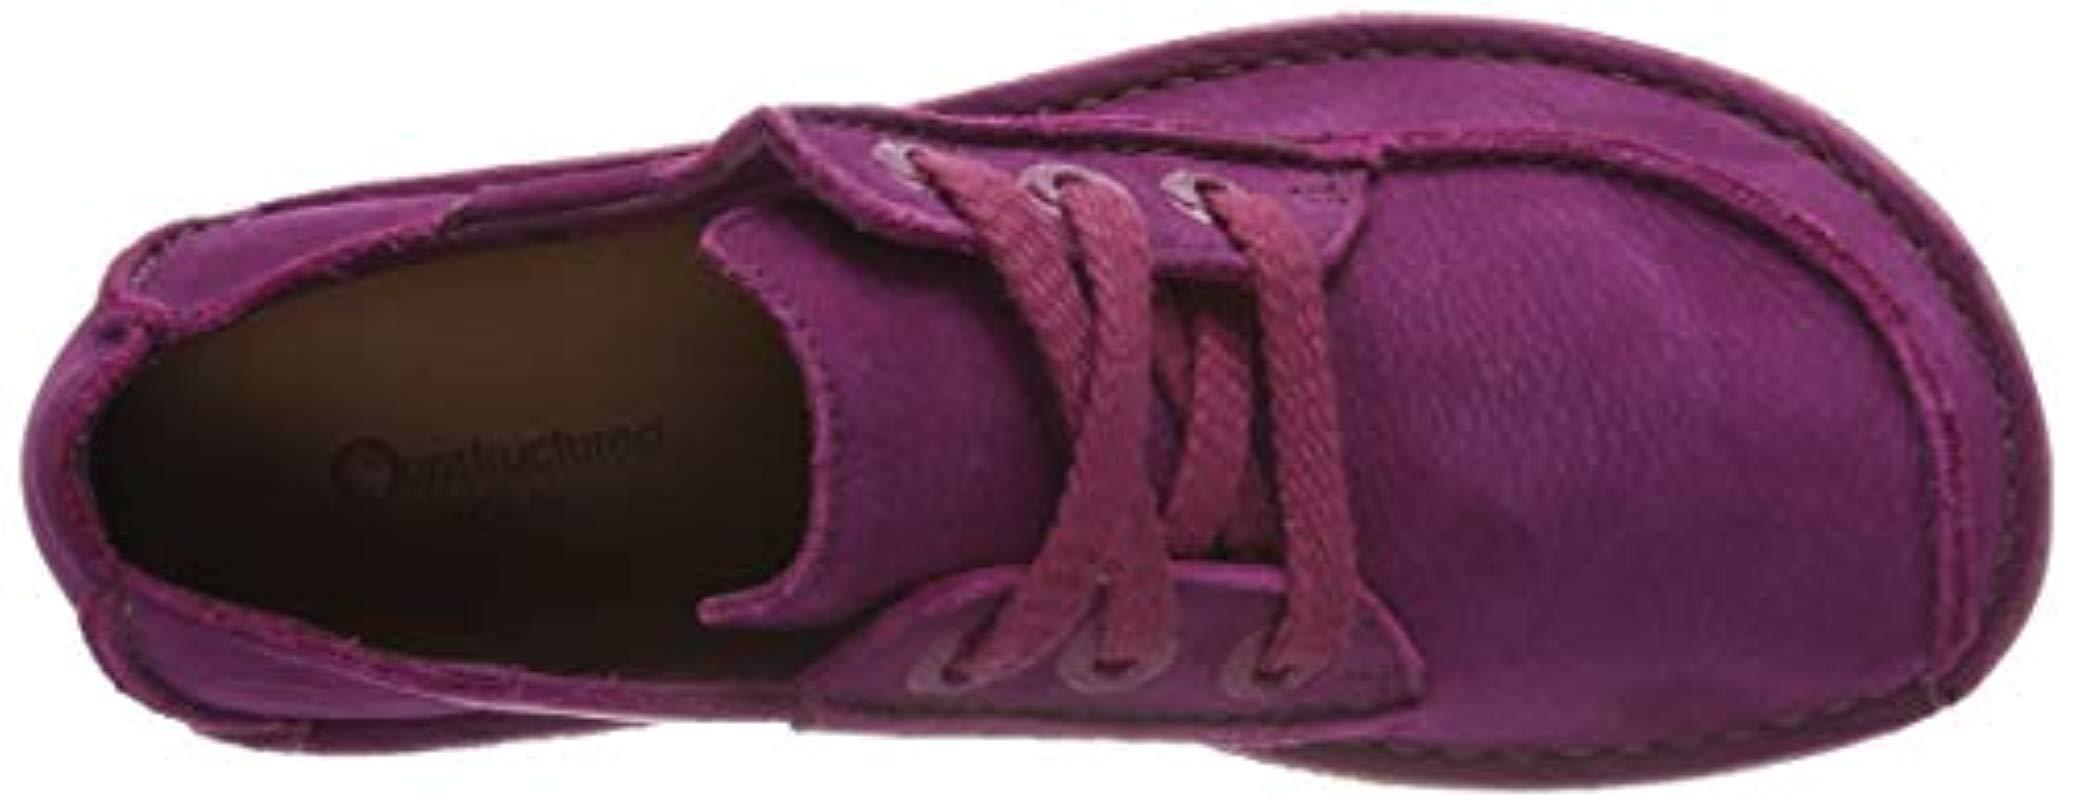 clarks funny dream shoes purple off 64 